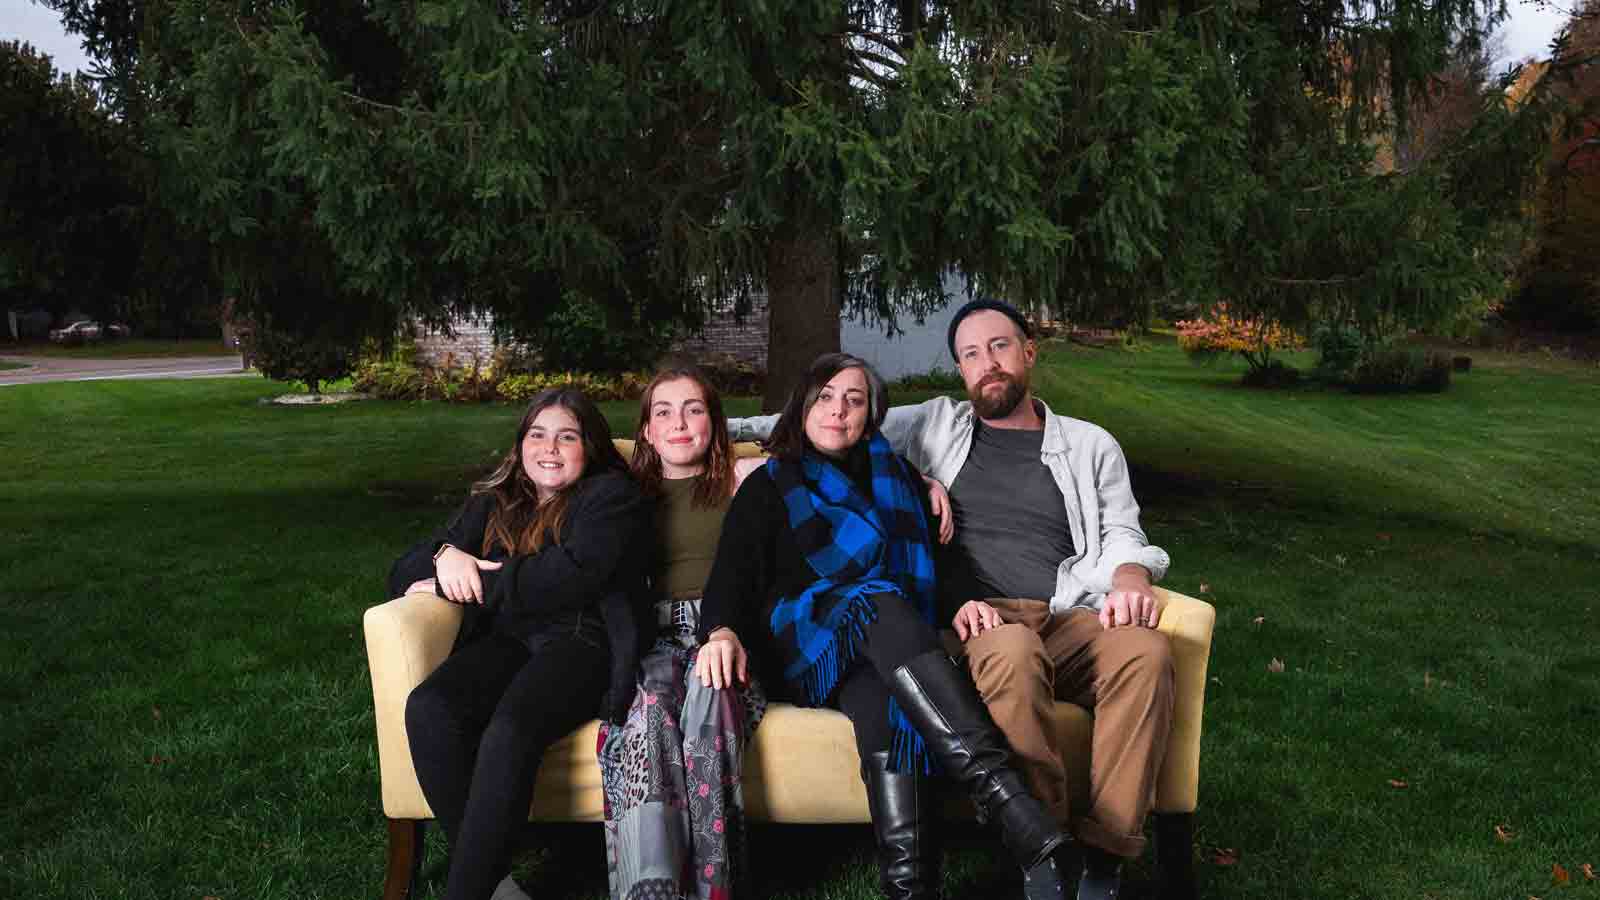 Meet the family who donated this year's Rockefeller Center Christmas
tree